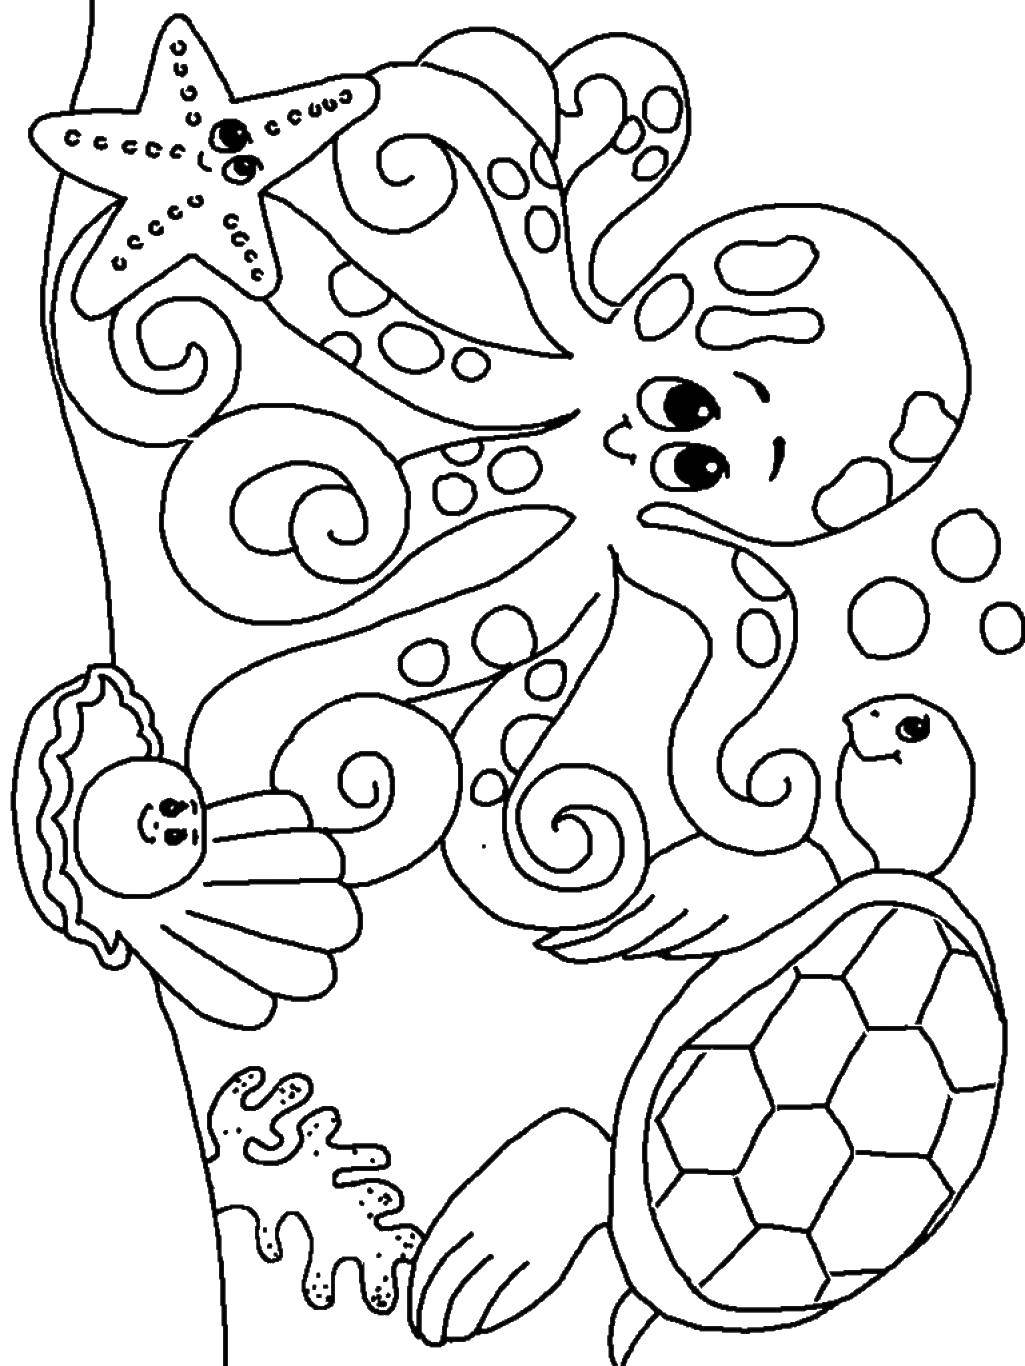 Coloring On the bottom of the sea. Category sea animals. Tags:  sea, water, octopus, turtle.